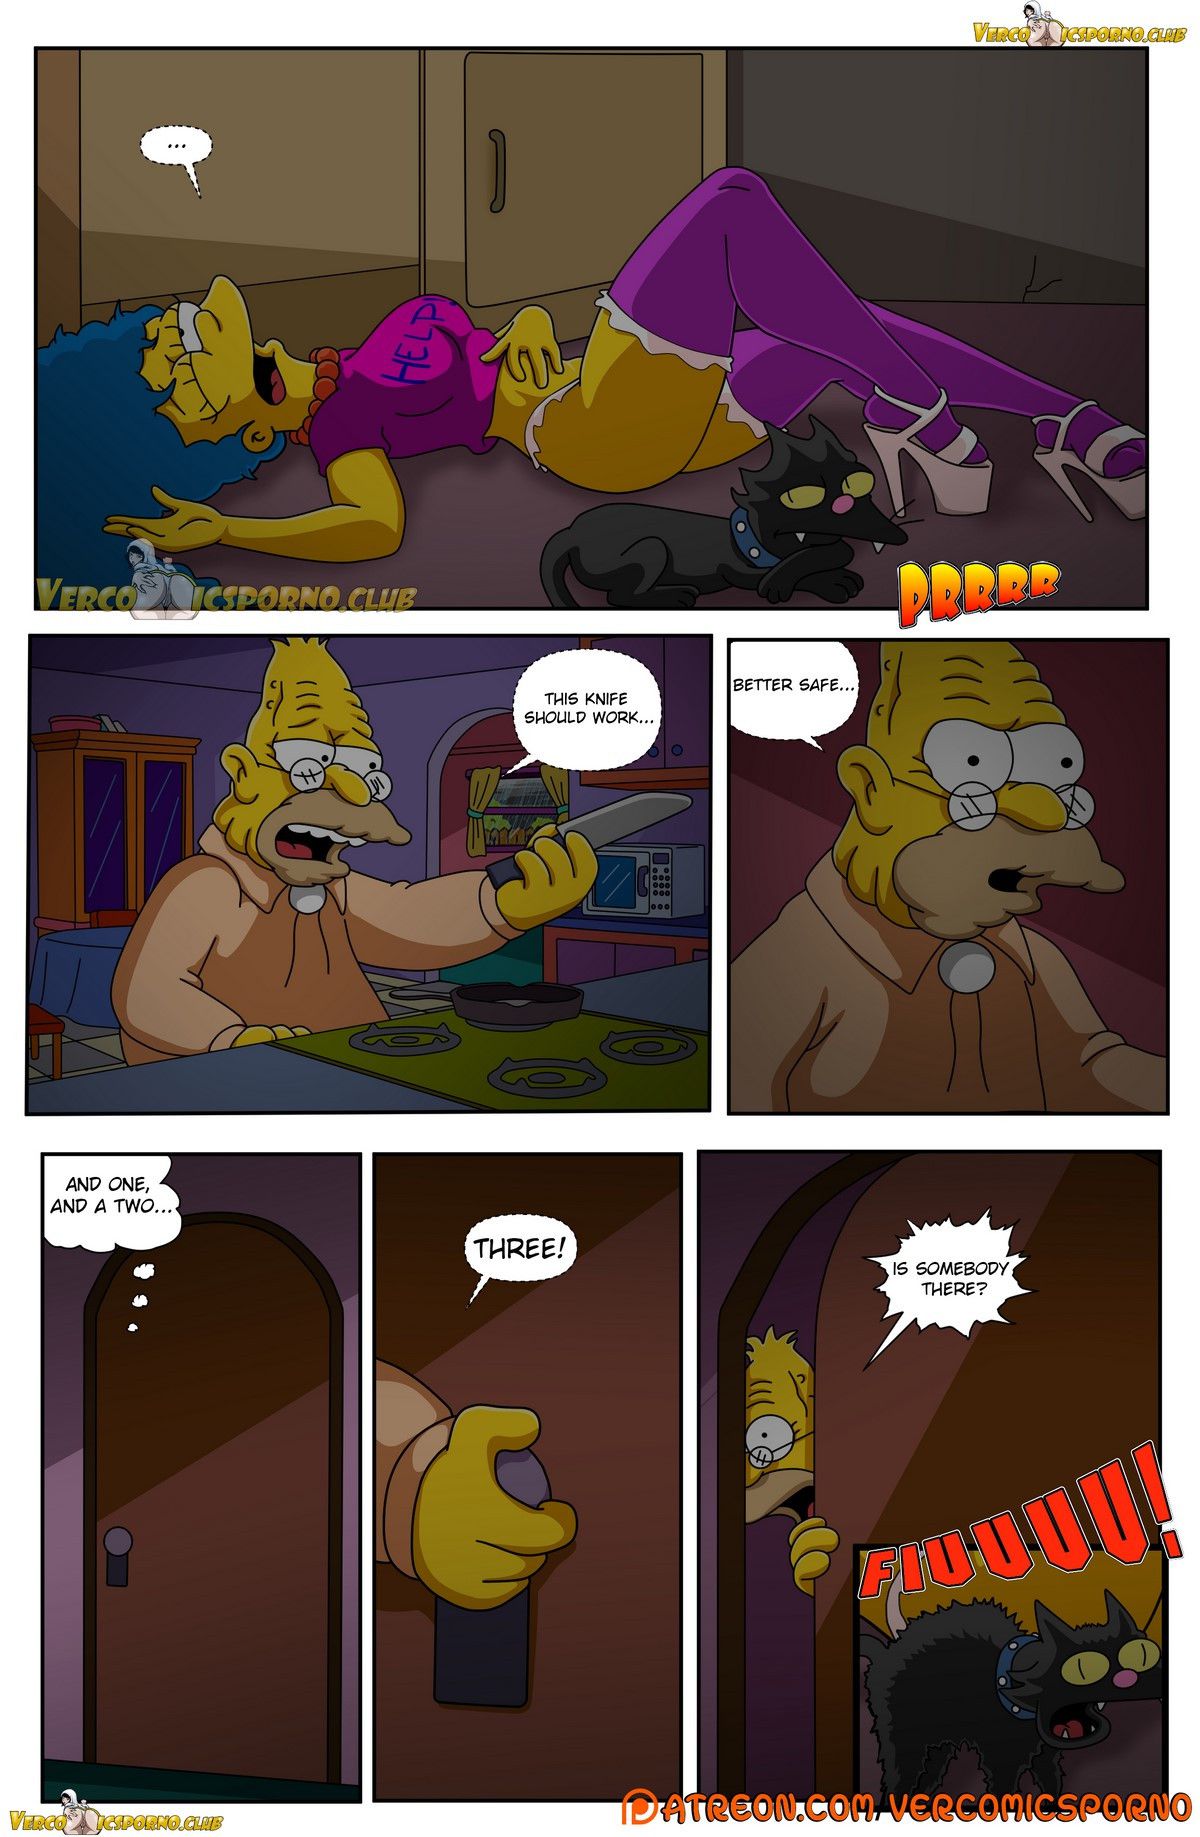 Grandpa and me - [Itooneaxxx] - [Drah Navlag] - [VCP] - [The Simpsons] 37